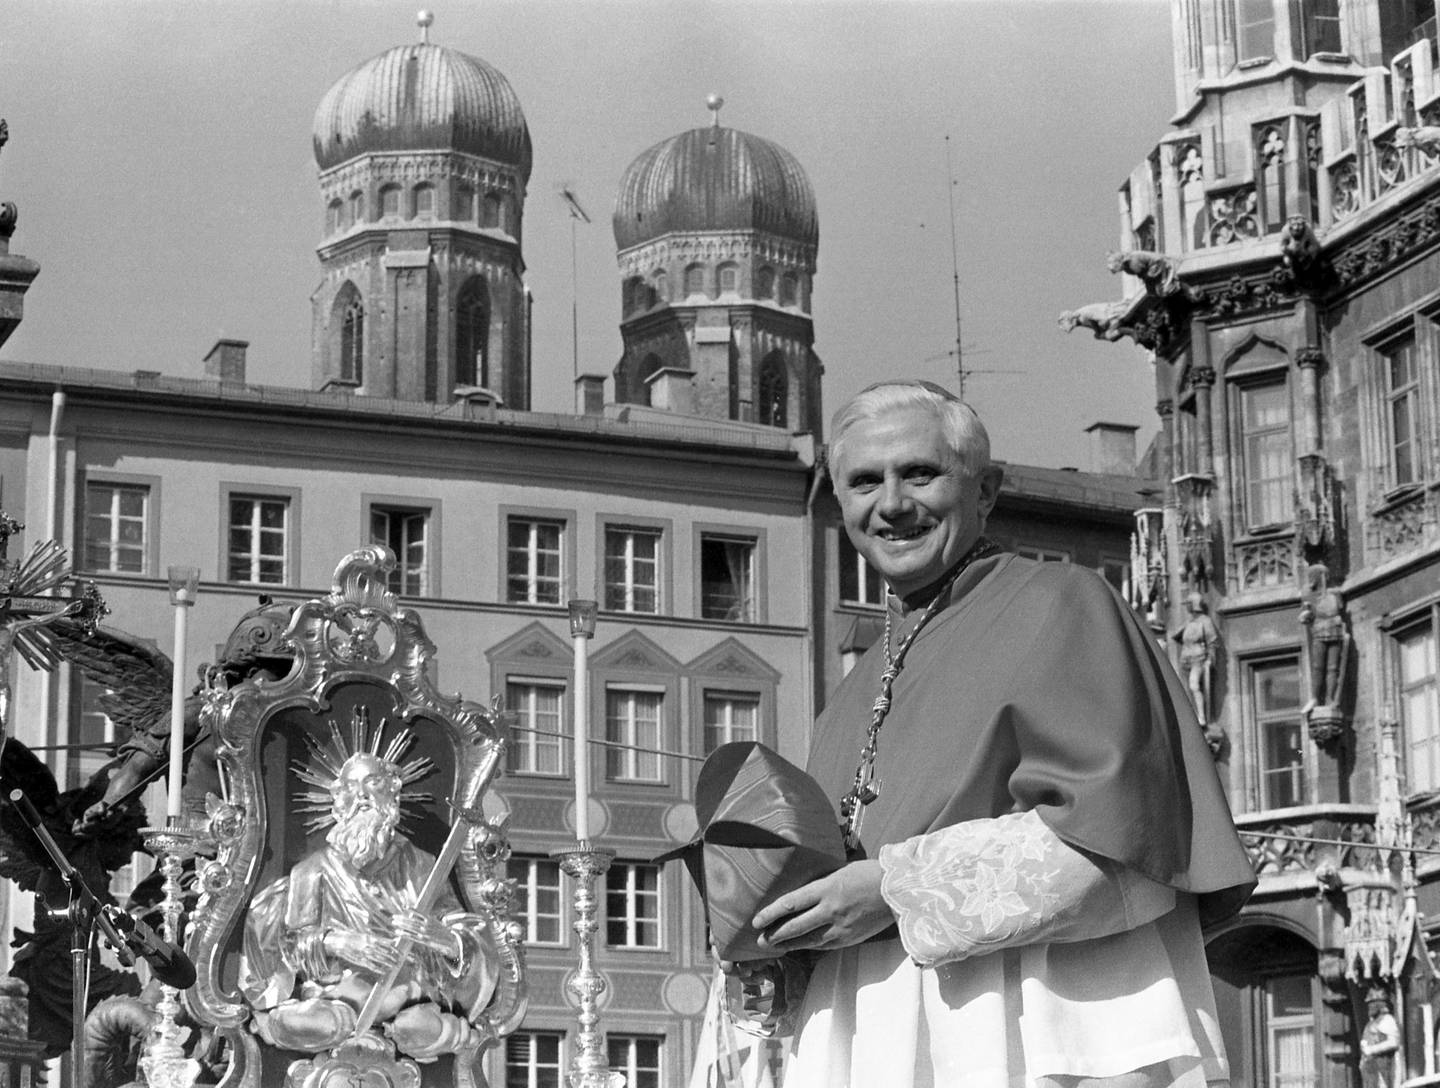 FILE - With the towers of Munich's cathedral in the background, Cardinal Joseph Ratzinger, later Pope Benedict XVI who retired in 2013, bids farewell to the Bavarian believers in downtown Munich, Germany, Sunday, Feb. 28, 1982. A report on decades of sexual abuse that shone an unflattering spotlight on retired Pope Benedict XVI has come on top of already strong pressure in Germany to reconsider Catholic rules on issues including homosexuality and women’s roles, adding to a mounting sense of impatience in the country's church. (AP Photo/Dieter Endlicher, File)